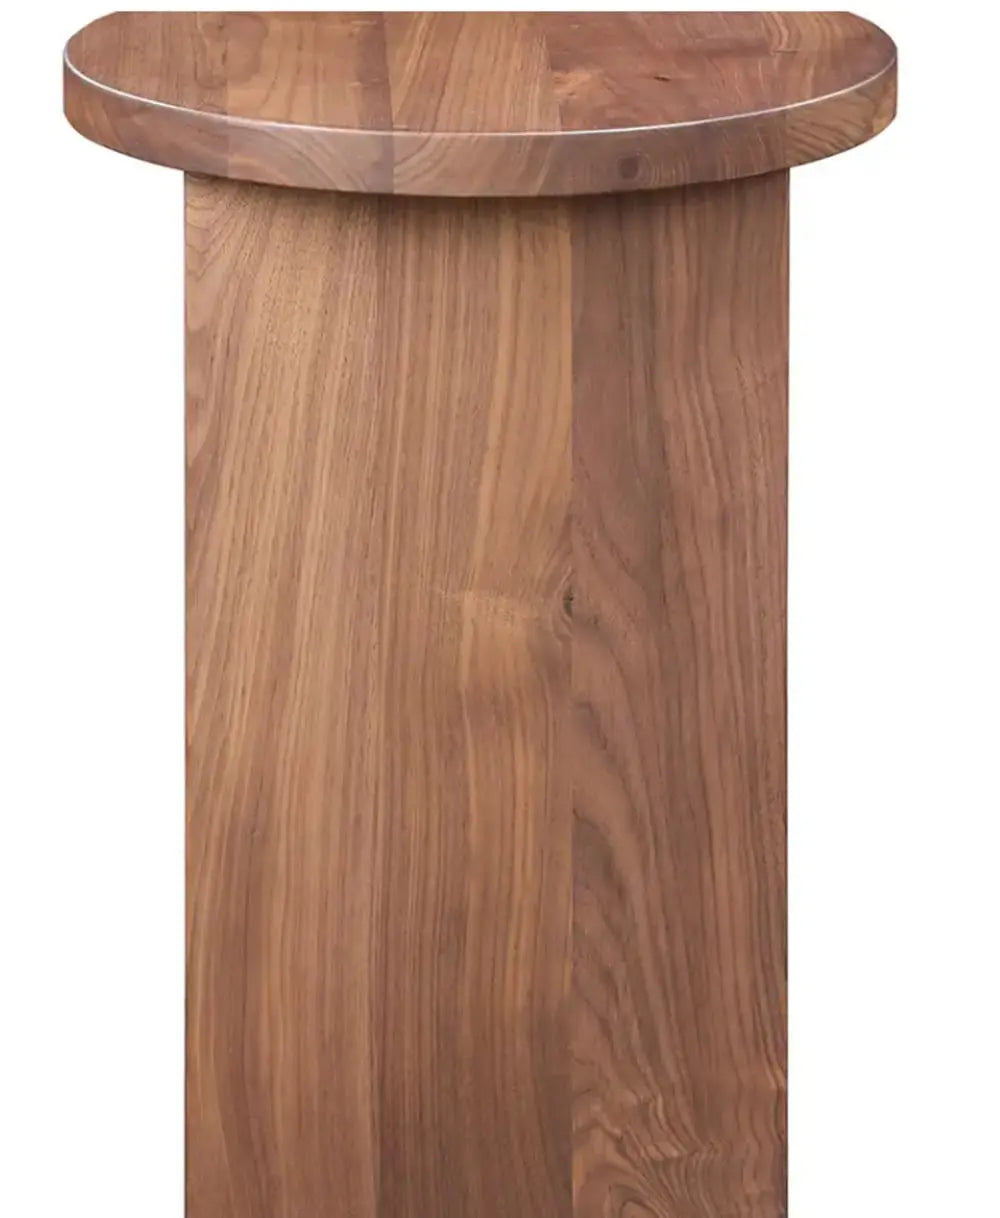 Acre Accent Table - Walnut